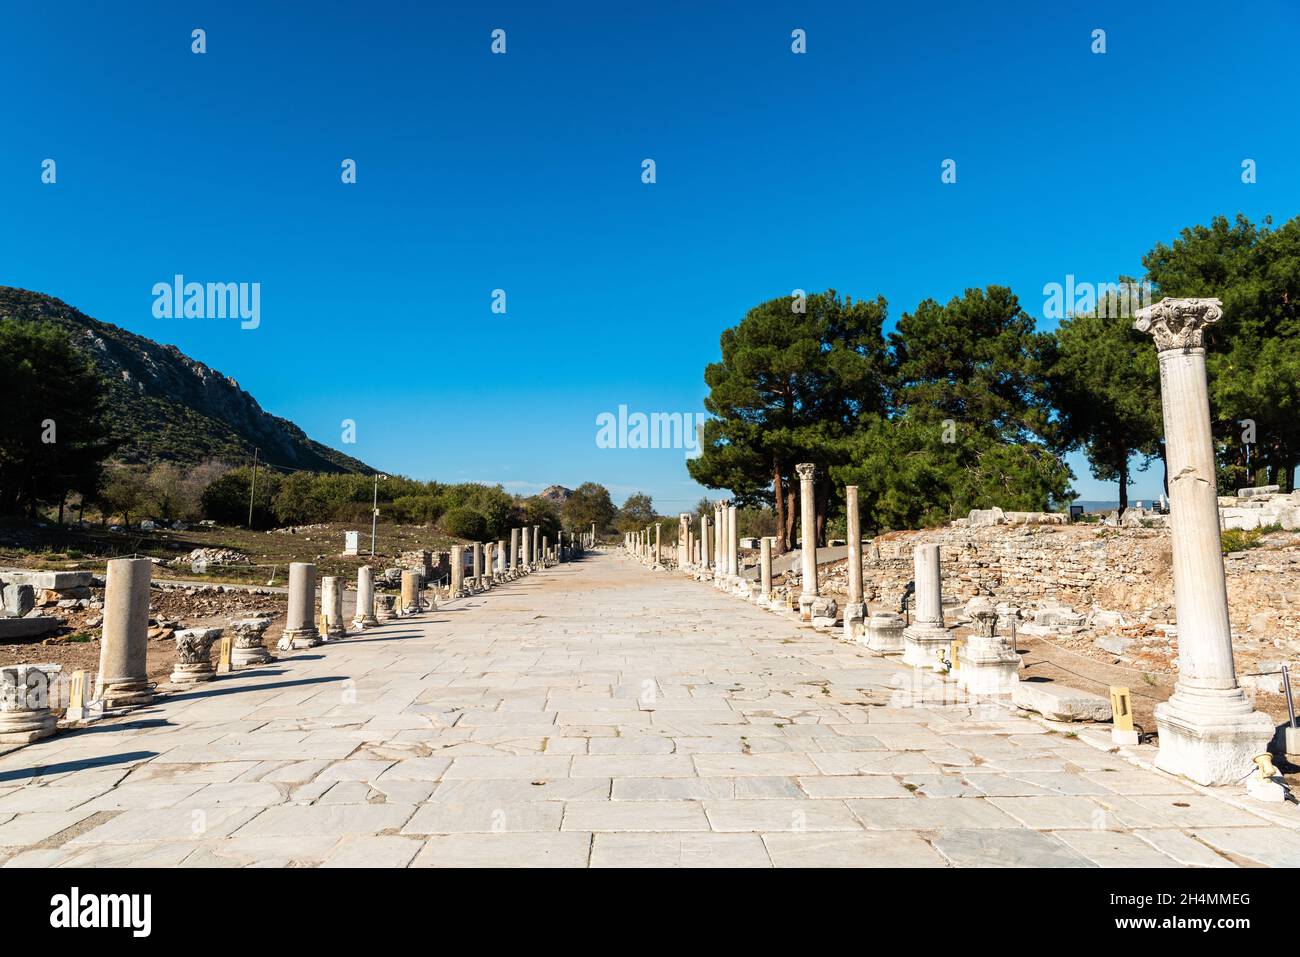 Harbour Street in Ephesus, Turkey. Formally the Arcadian Way, Harbour Street was built by Byzantine emperor Arcadius in a late attempt to revive the f Stock Photo